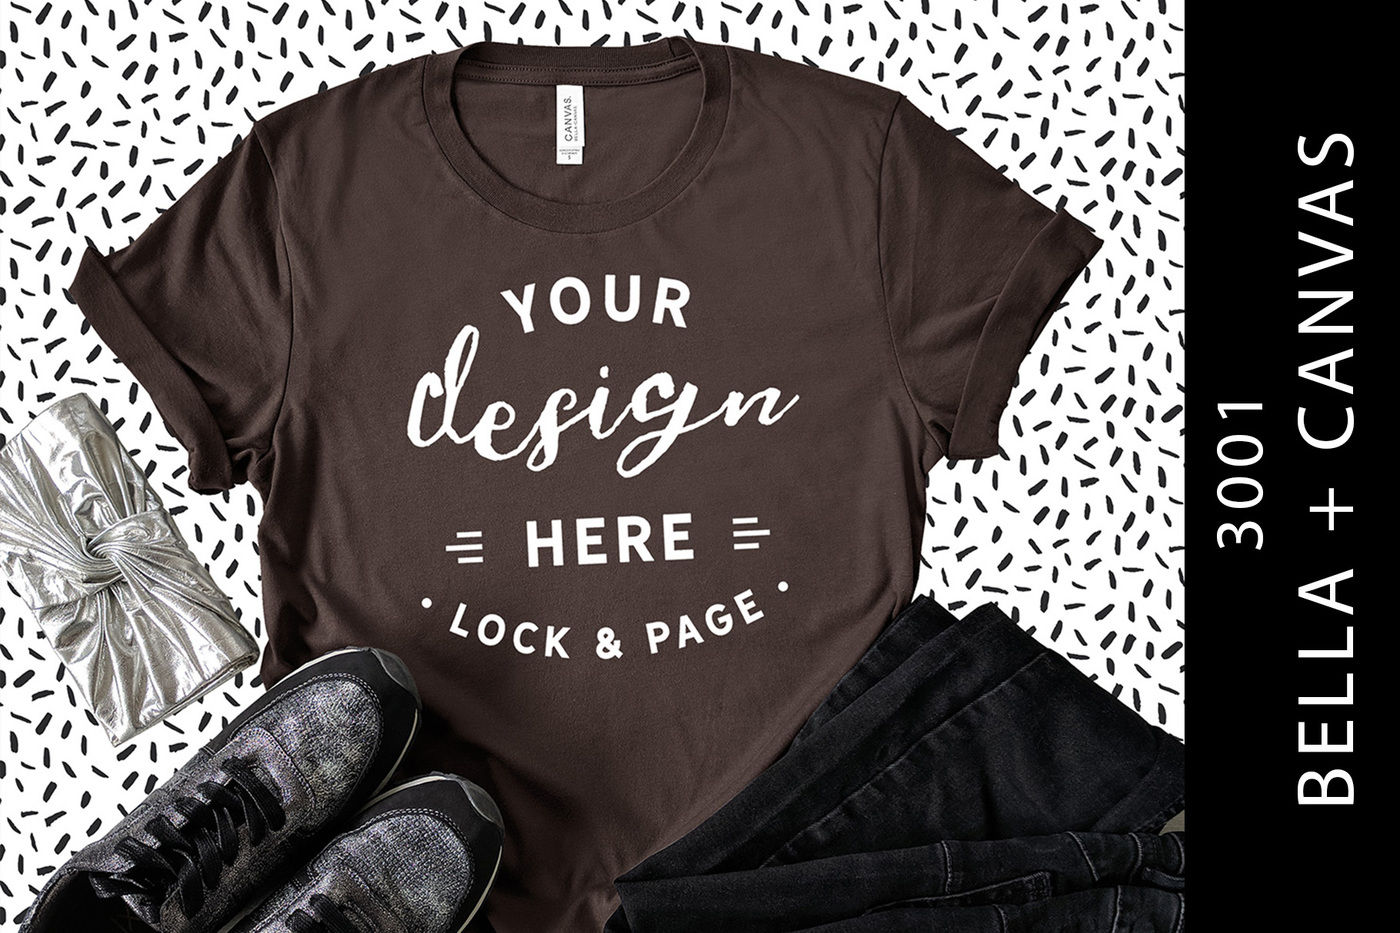 Download Brown Bella Canvas 3001 T-Shirt Mockup Cool Fashion Flat Lay By Lock and Page | TheHungryJPEG.com